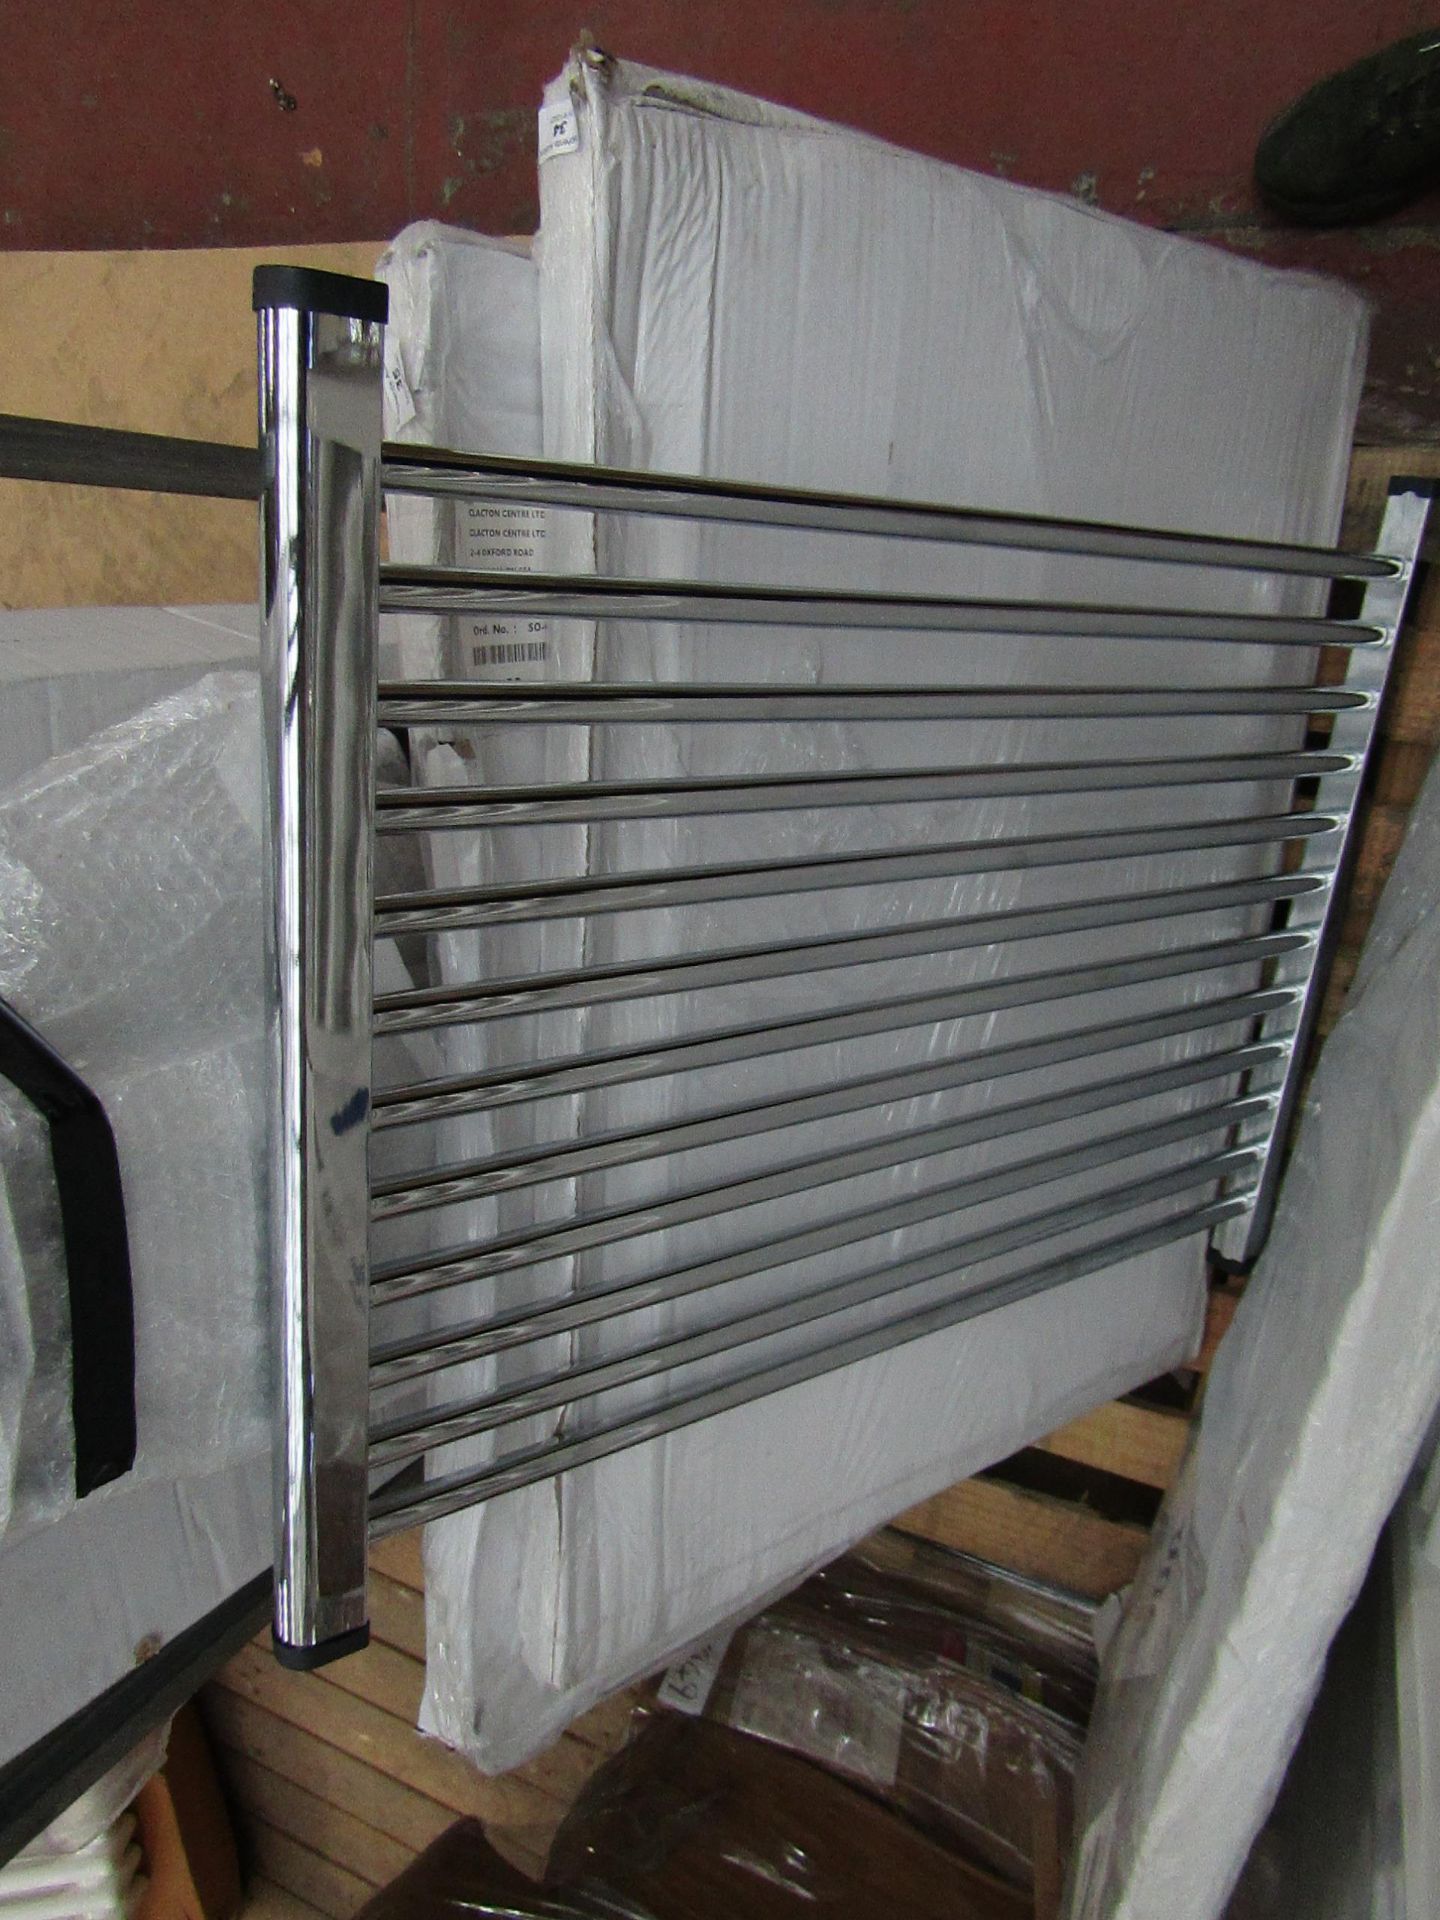 Loco horizontal towel radiator 800 x 600, ex-display and boxed. Please note, this lot may contain